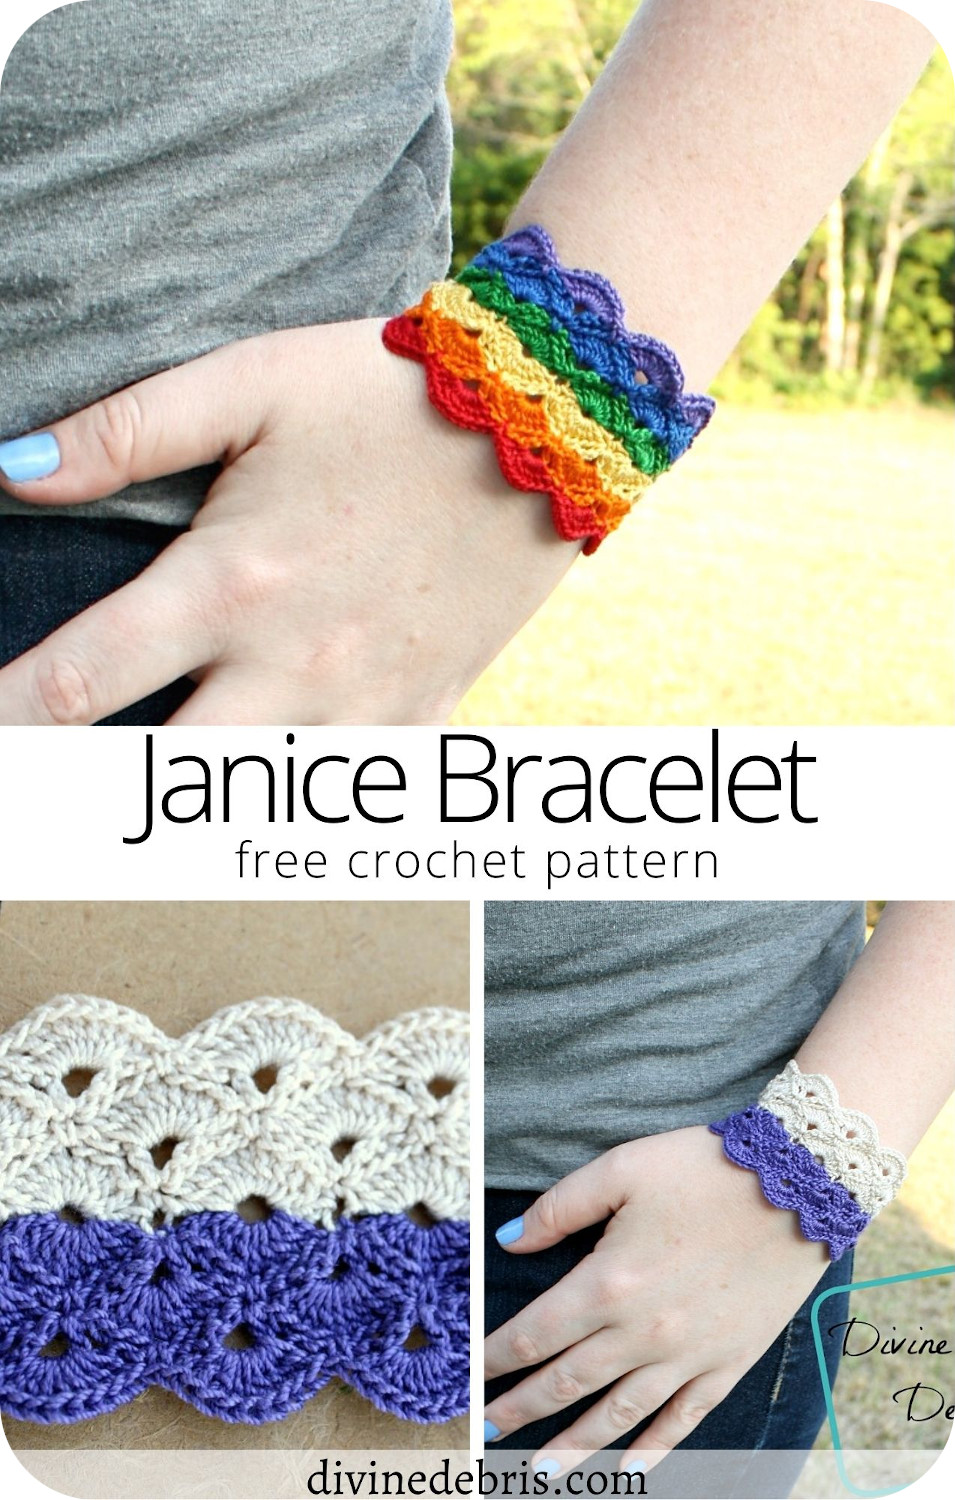 Learn to make the fun, eye-catching, and surprisingly easy Janice Bracelet from a free crochet pattern on DivnieDebris.com